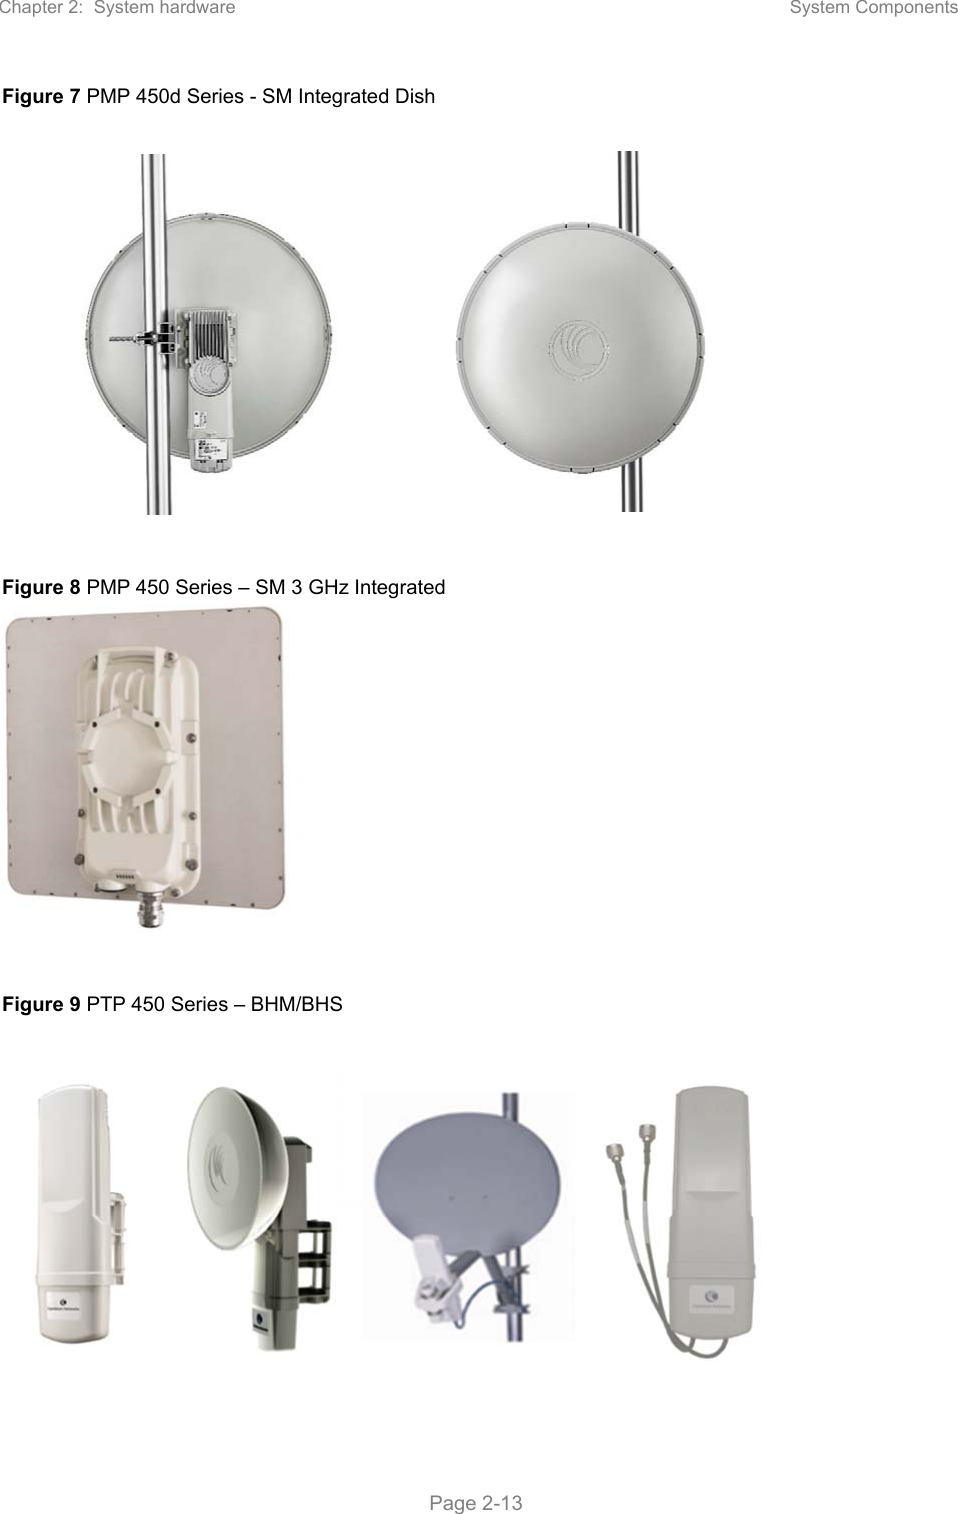 Chapter 2:  System hardware  System Components   Page 2-13 Figure 7 PMP 450d Series - SM Integrated Dish    Figure 8 PMP 450 Series – SM 3 GHz Integrated    Figure 9 PTP 450 Series – BHM/BHS   